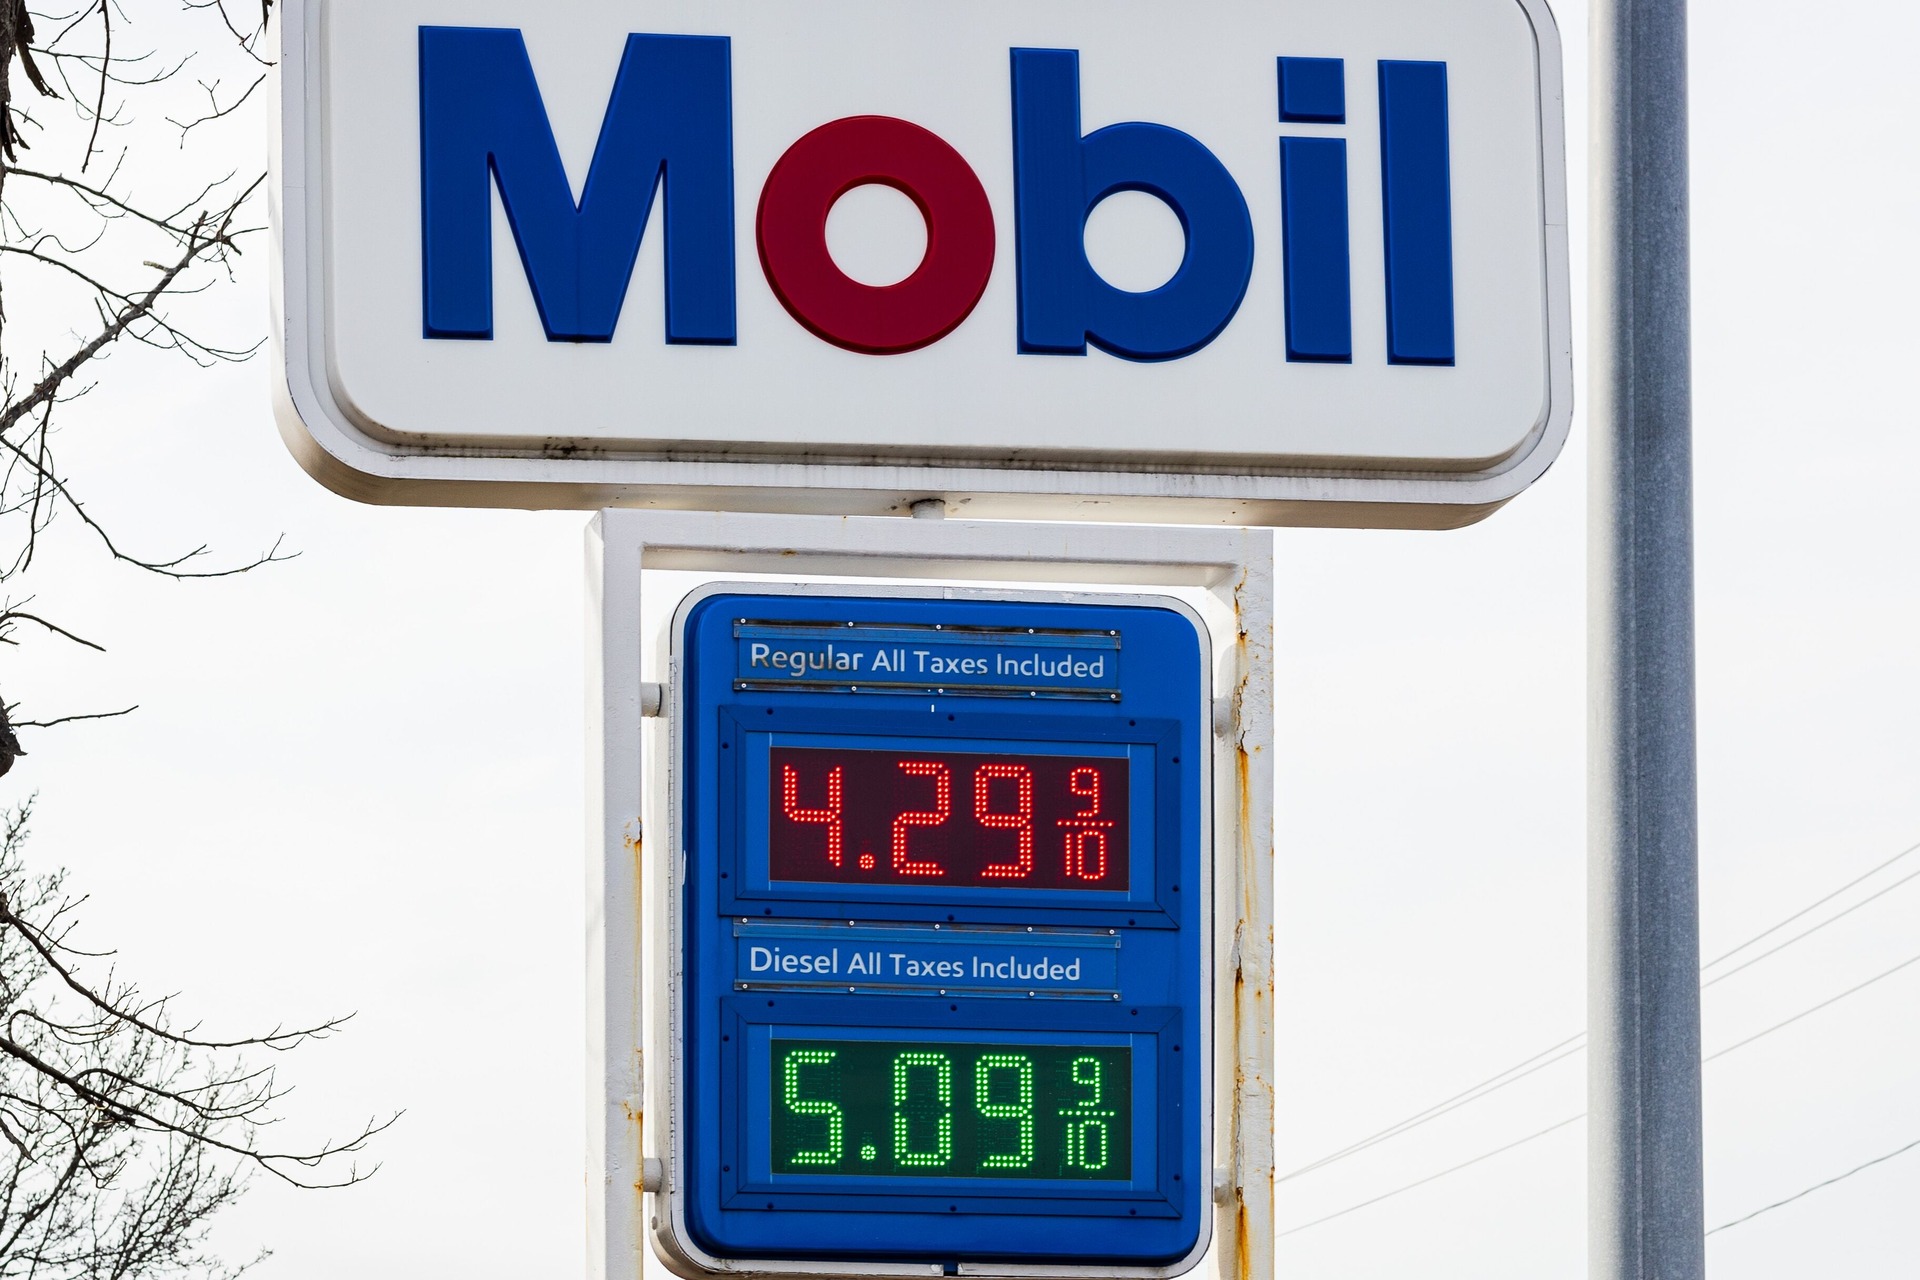 A Mobil gas station price sign